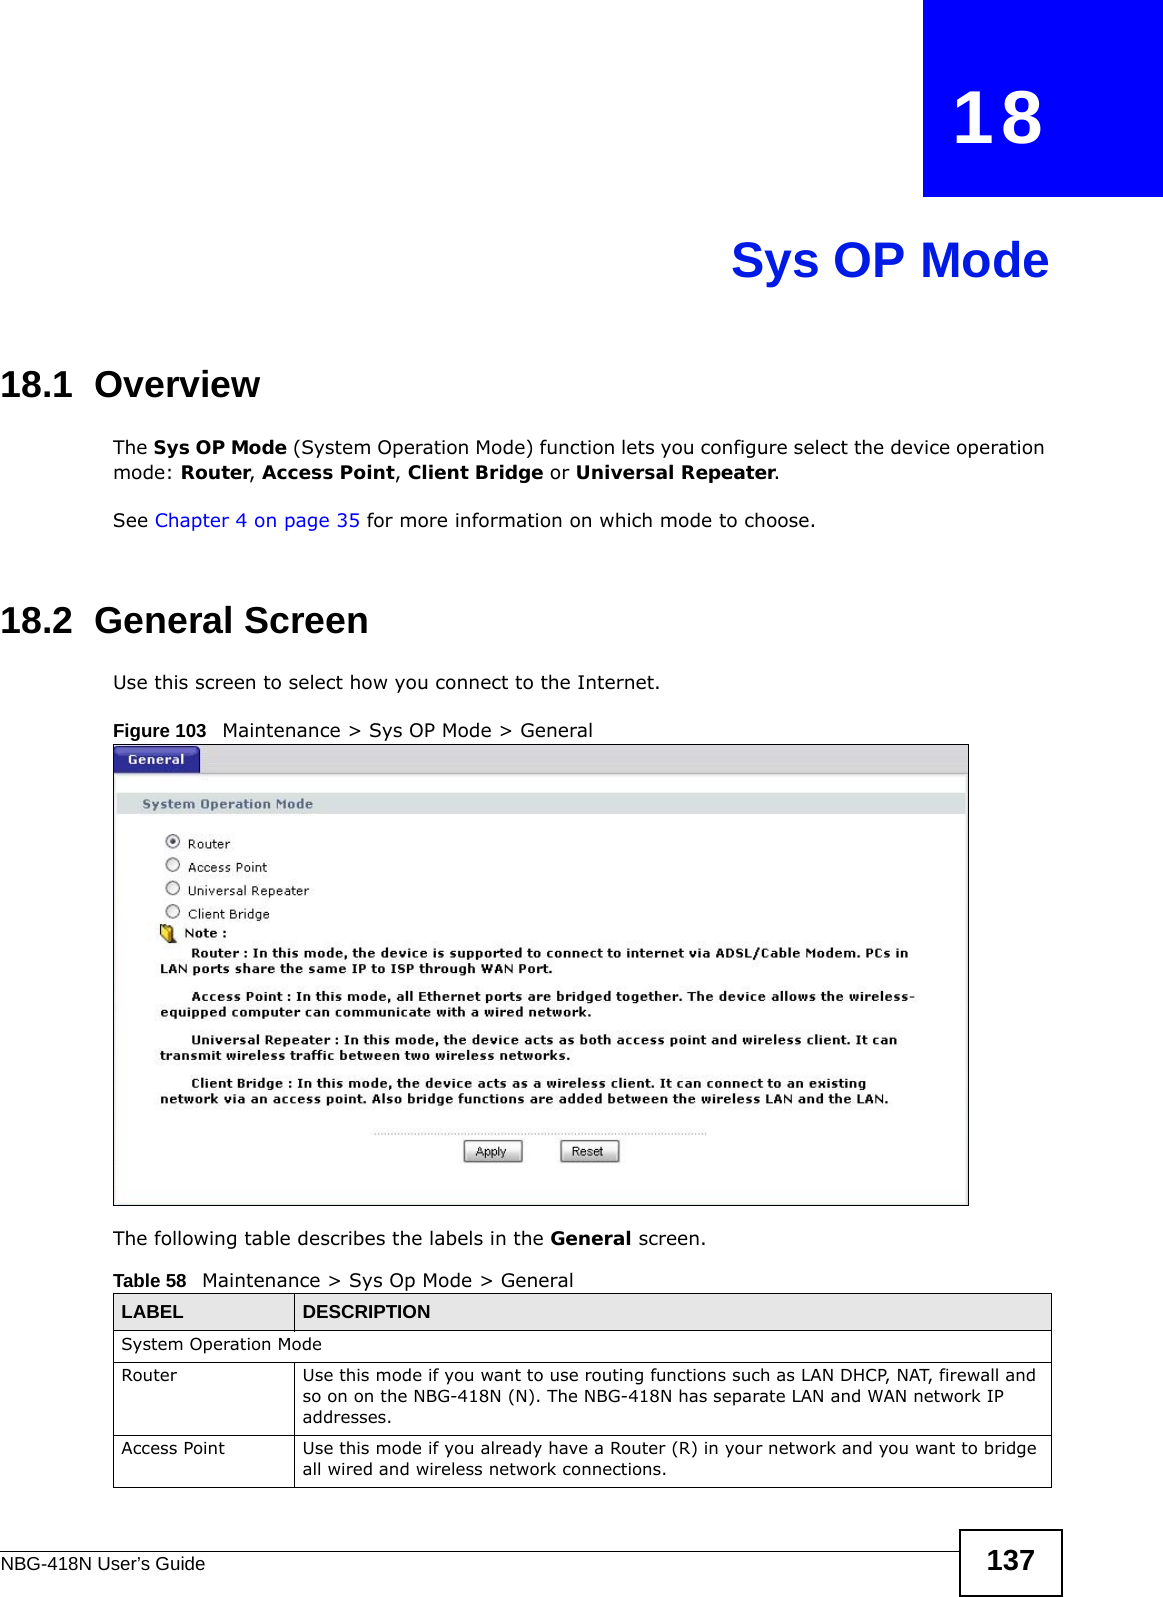 NBG-418N User’s Guide 137CHAPTER   18Sys OP Mode18.1  OverviewThe Sys OP Mode (System Operation Mode) function lets you configure select the device operation mode: Router, Access Point, Client Bridge or Universal Repeater. See Chapter 4 on page 35 for more information on which mode to choose.18.2  General ScreenUse this screen to select how you connect to the Internet. Figure 103   Maintenance &gt; Sys OP Mode &gt; General The following table describes the labels in the General screen.Table 58   Maintenance &gt; Sys Op Mode &gt; GeneralLABEL DESCRIPTIONSystem Operation ModeRouter  Use this mode if you want to use routing functions such as LAN DHCP, NAT, firewall and so on on the NBG-418N (N). The NBG-418N has separate LAN and WAN network IP addresses.Access Point Use this mode if you already have a Router (R) in your network and you want to bridge all wired and wireless network connections.